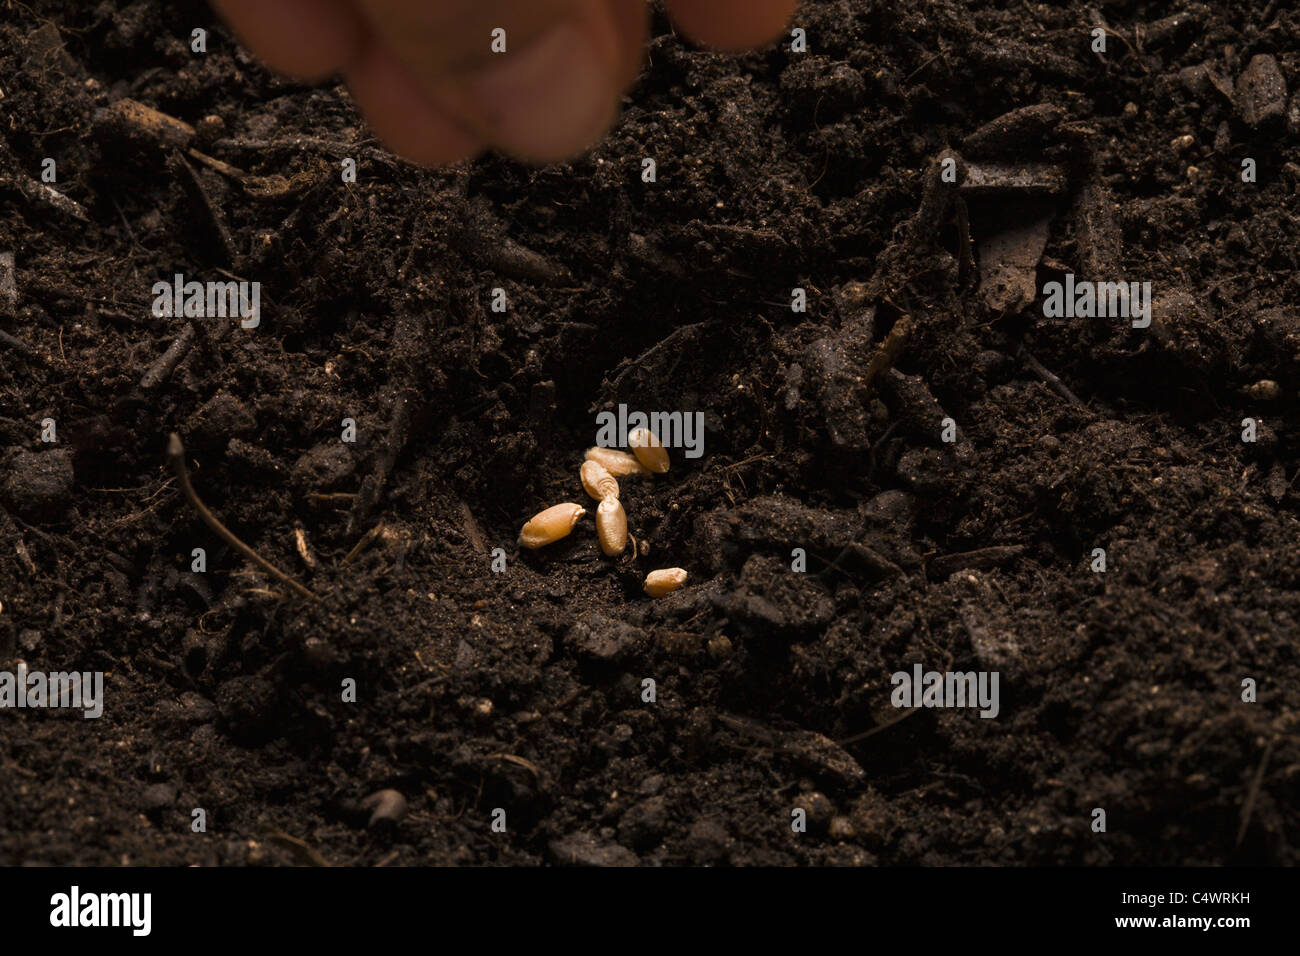 Close-up of hand sowing seeds Stock Photo